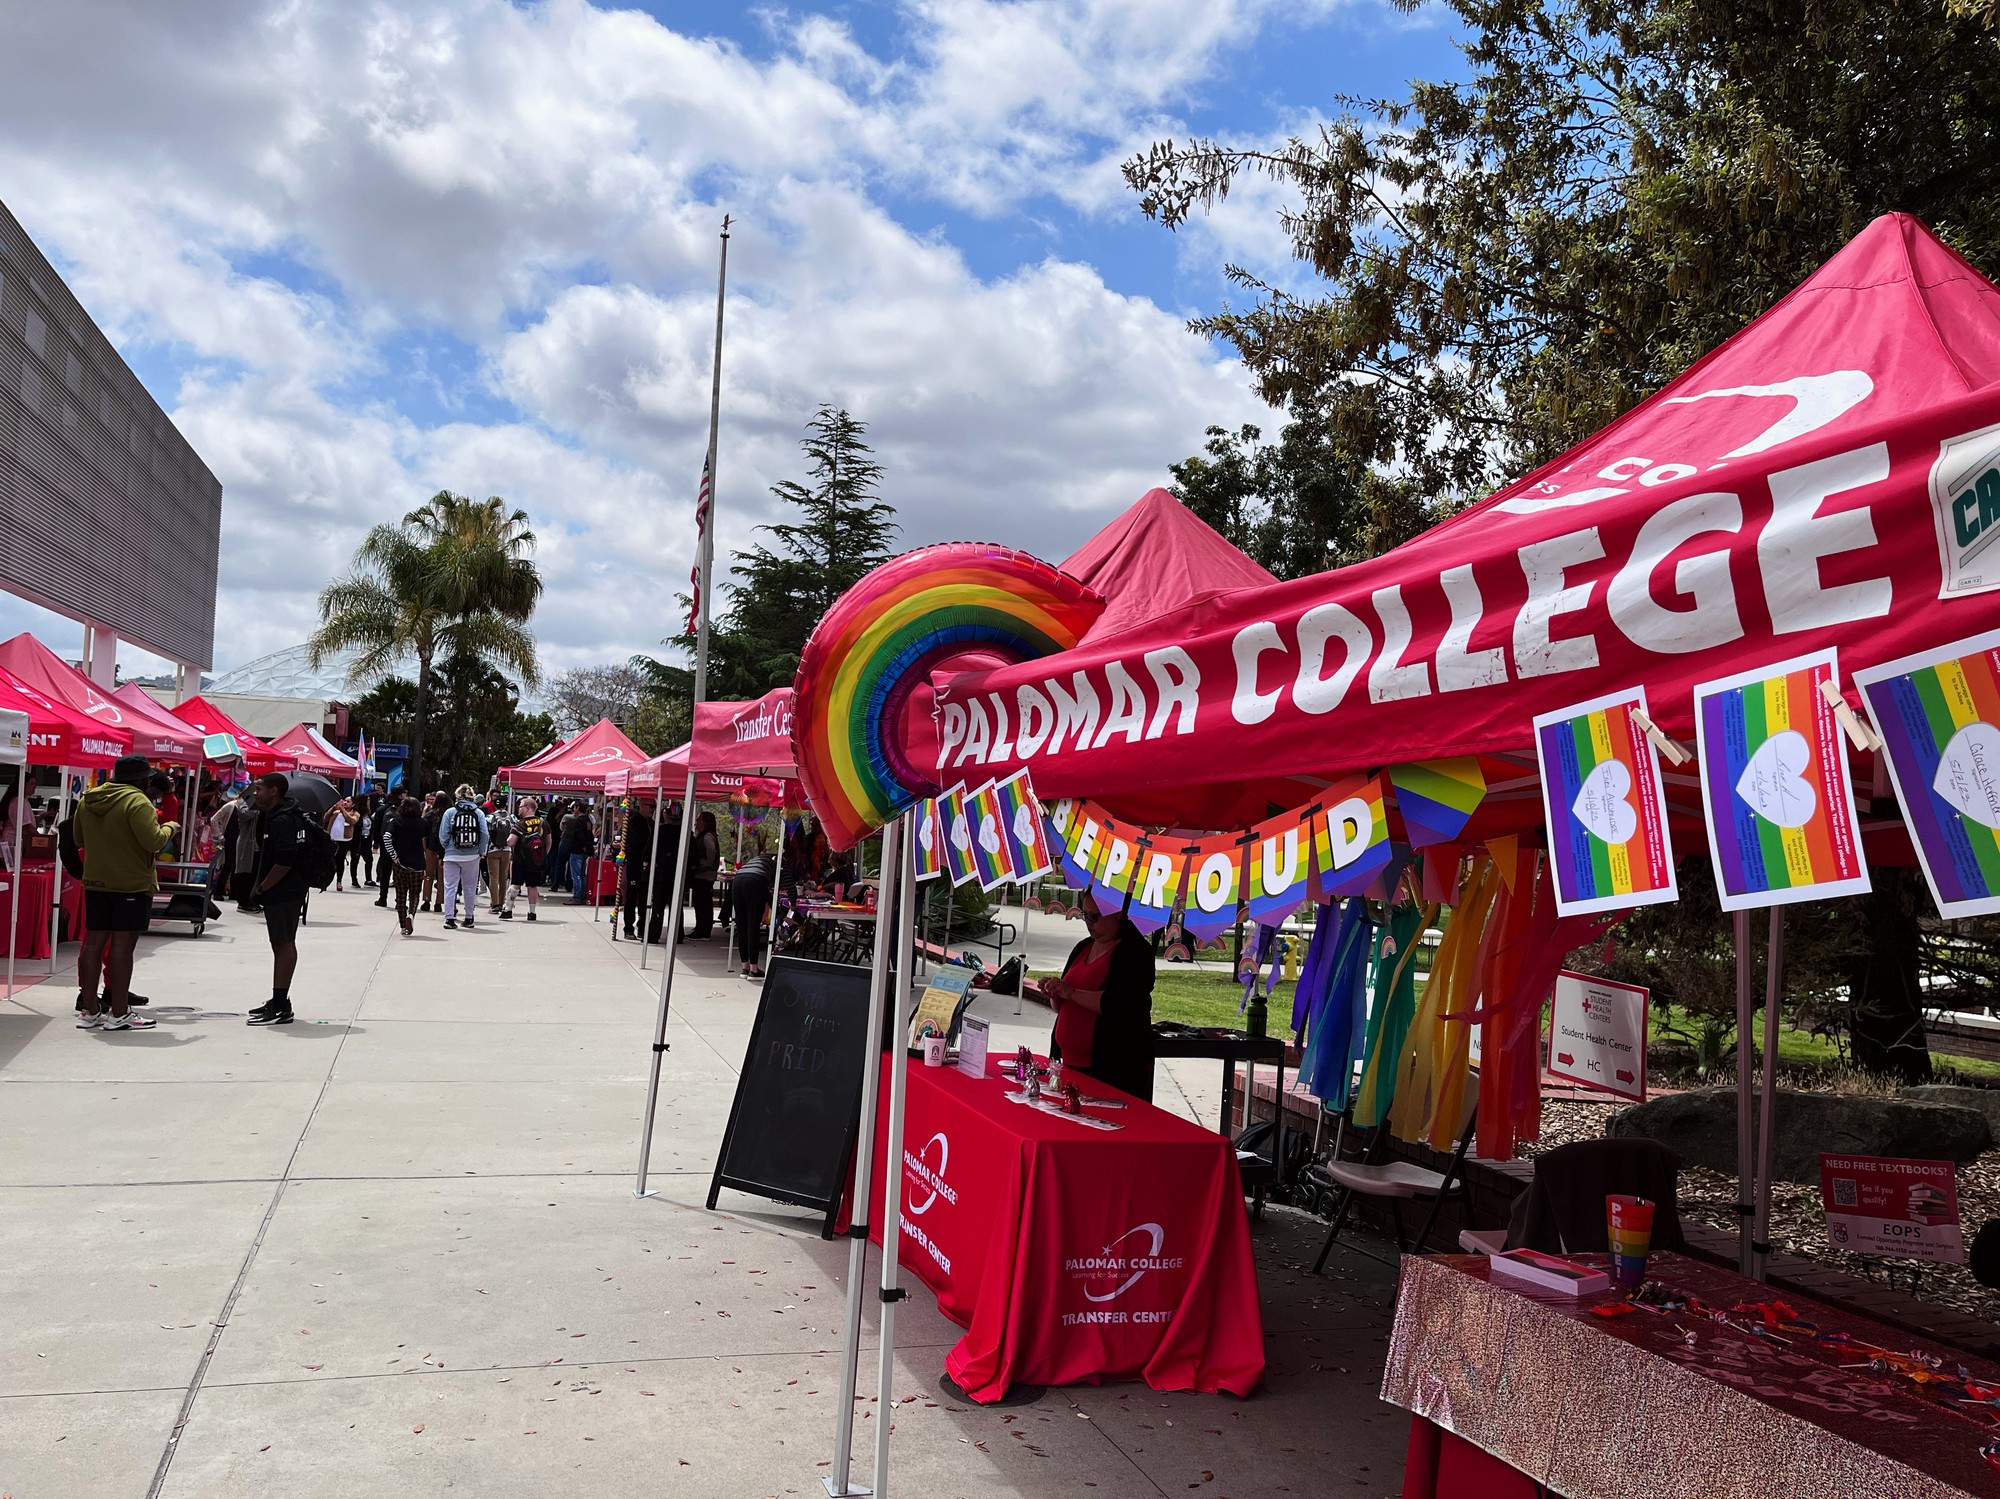 A Pride booth is near the Palomar College's cafeteria as students walk by.